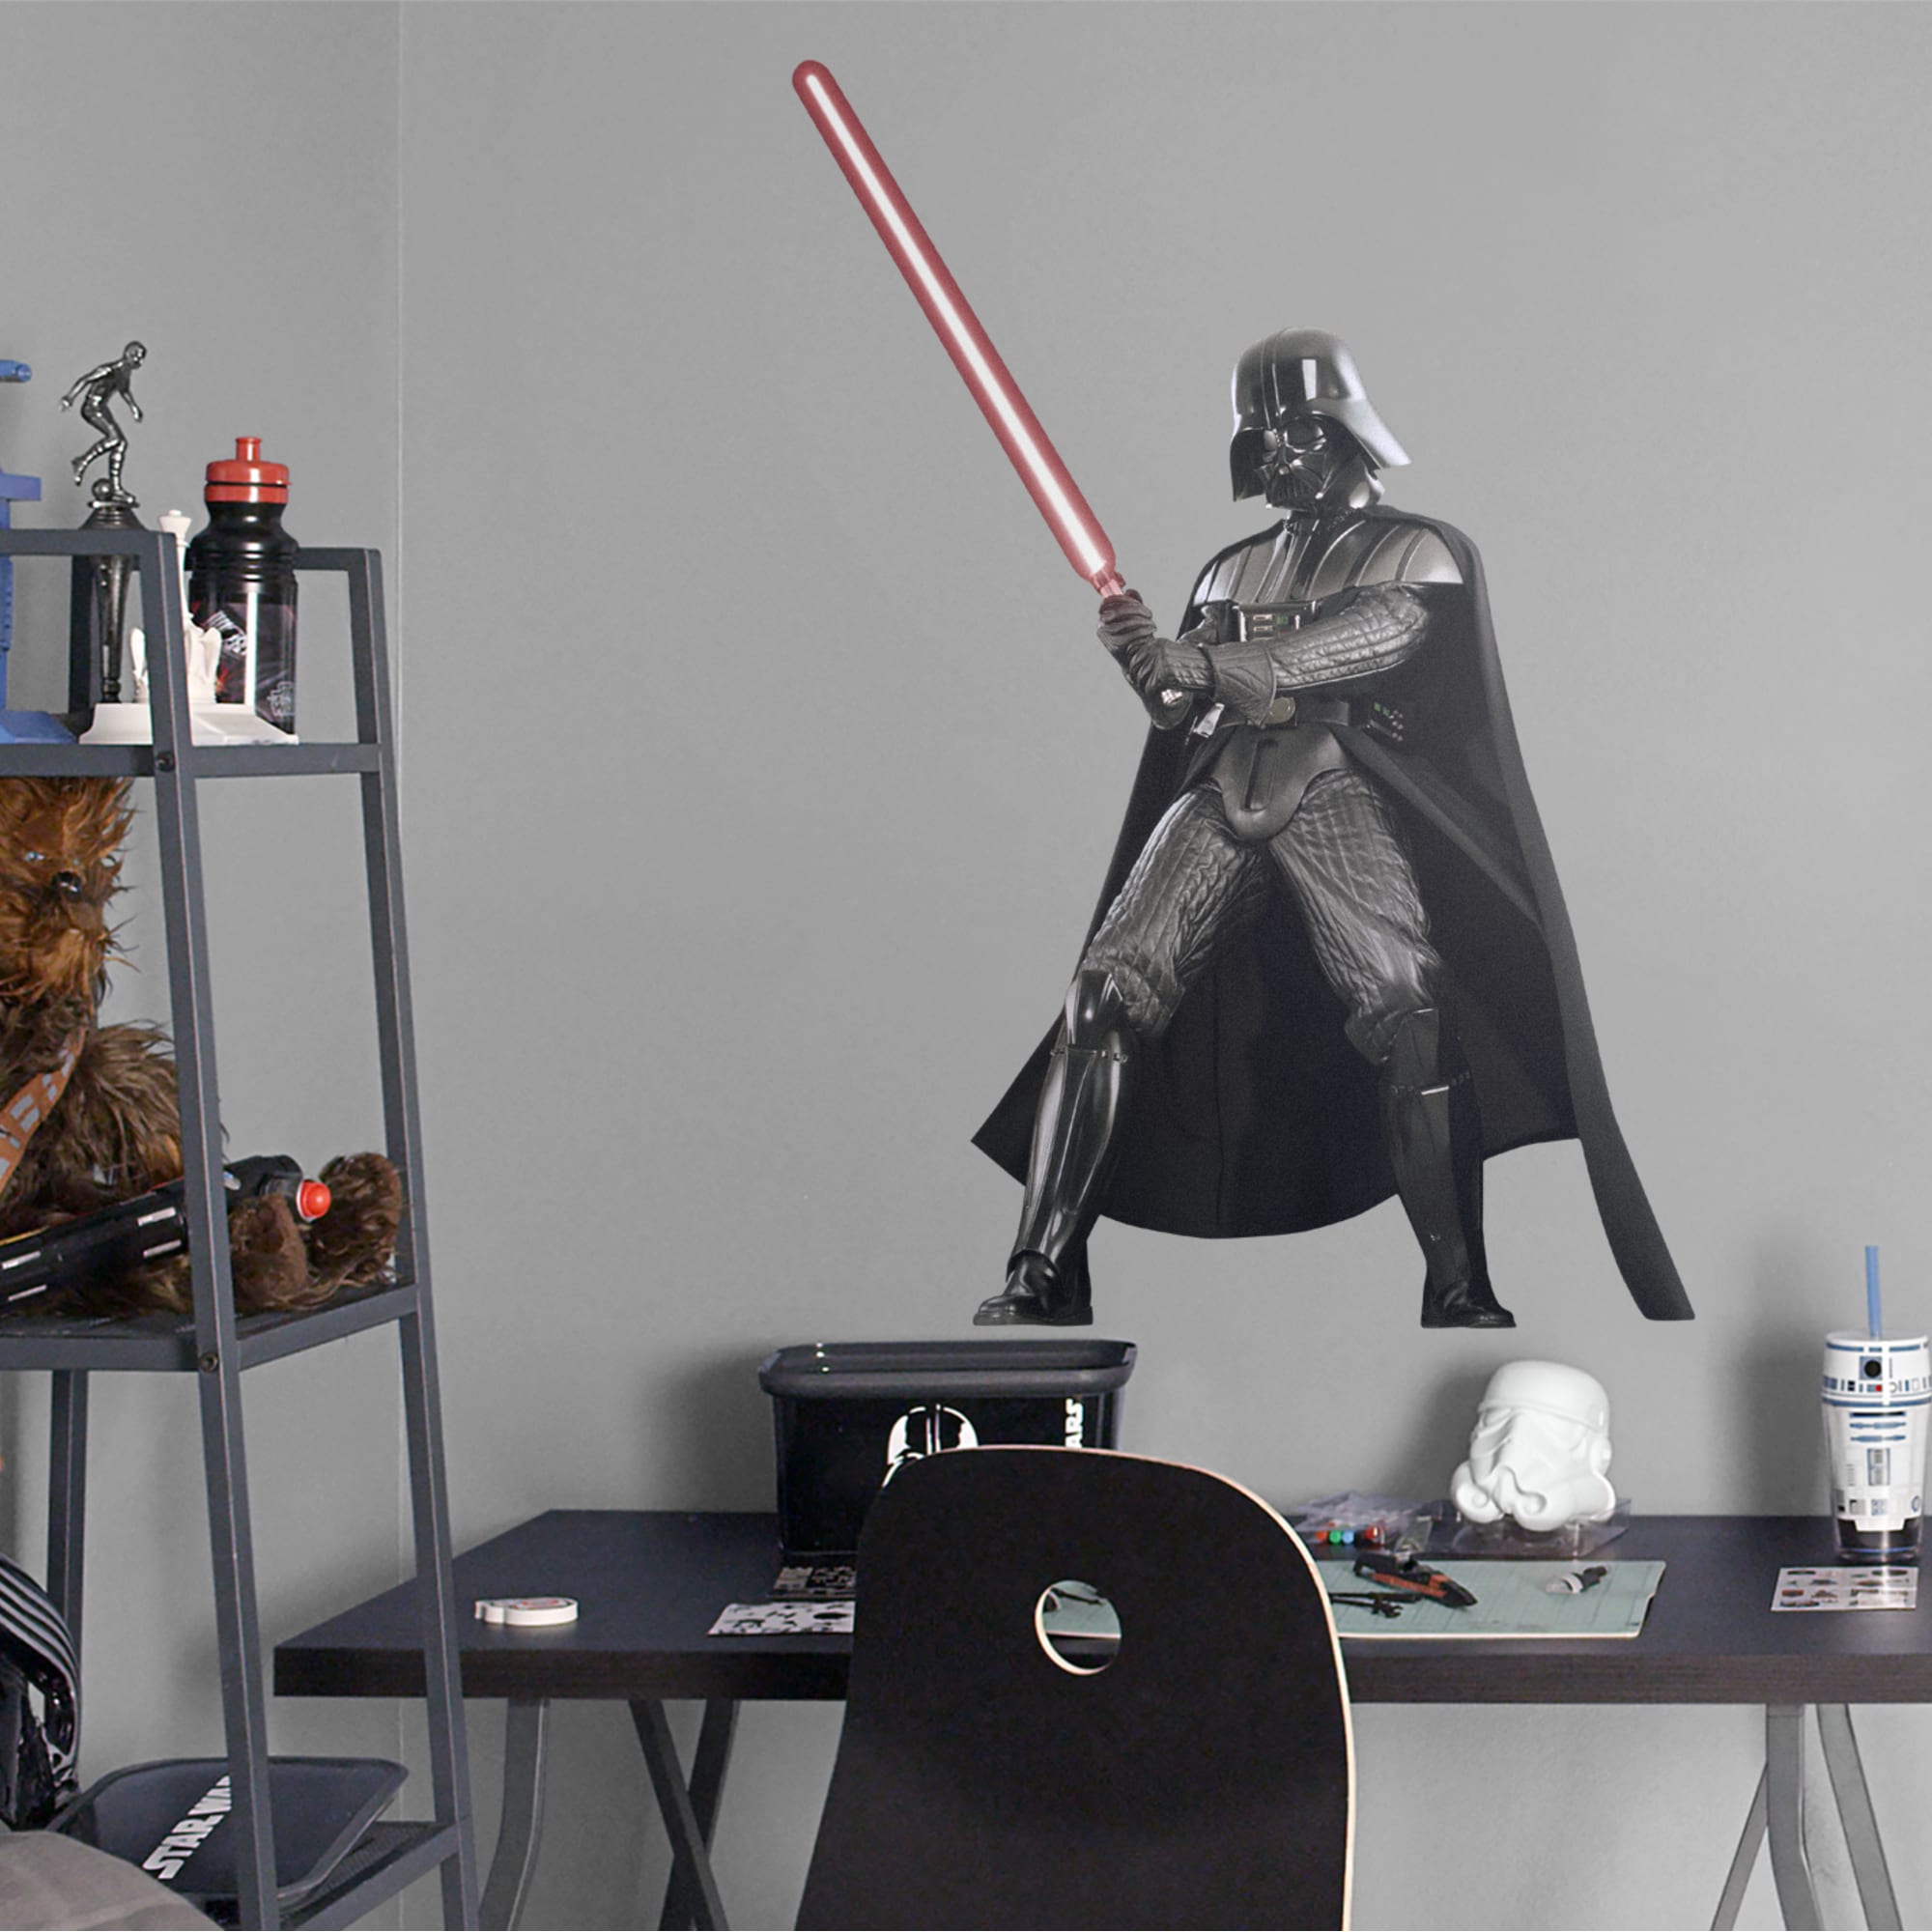 Darth Vader - Officially Licensed Removable Wall Decal 30.0"W x 41.0"H by Fathead | Vinyl